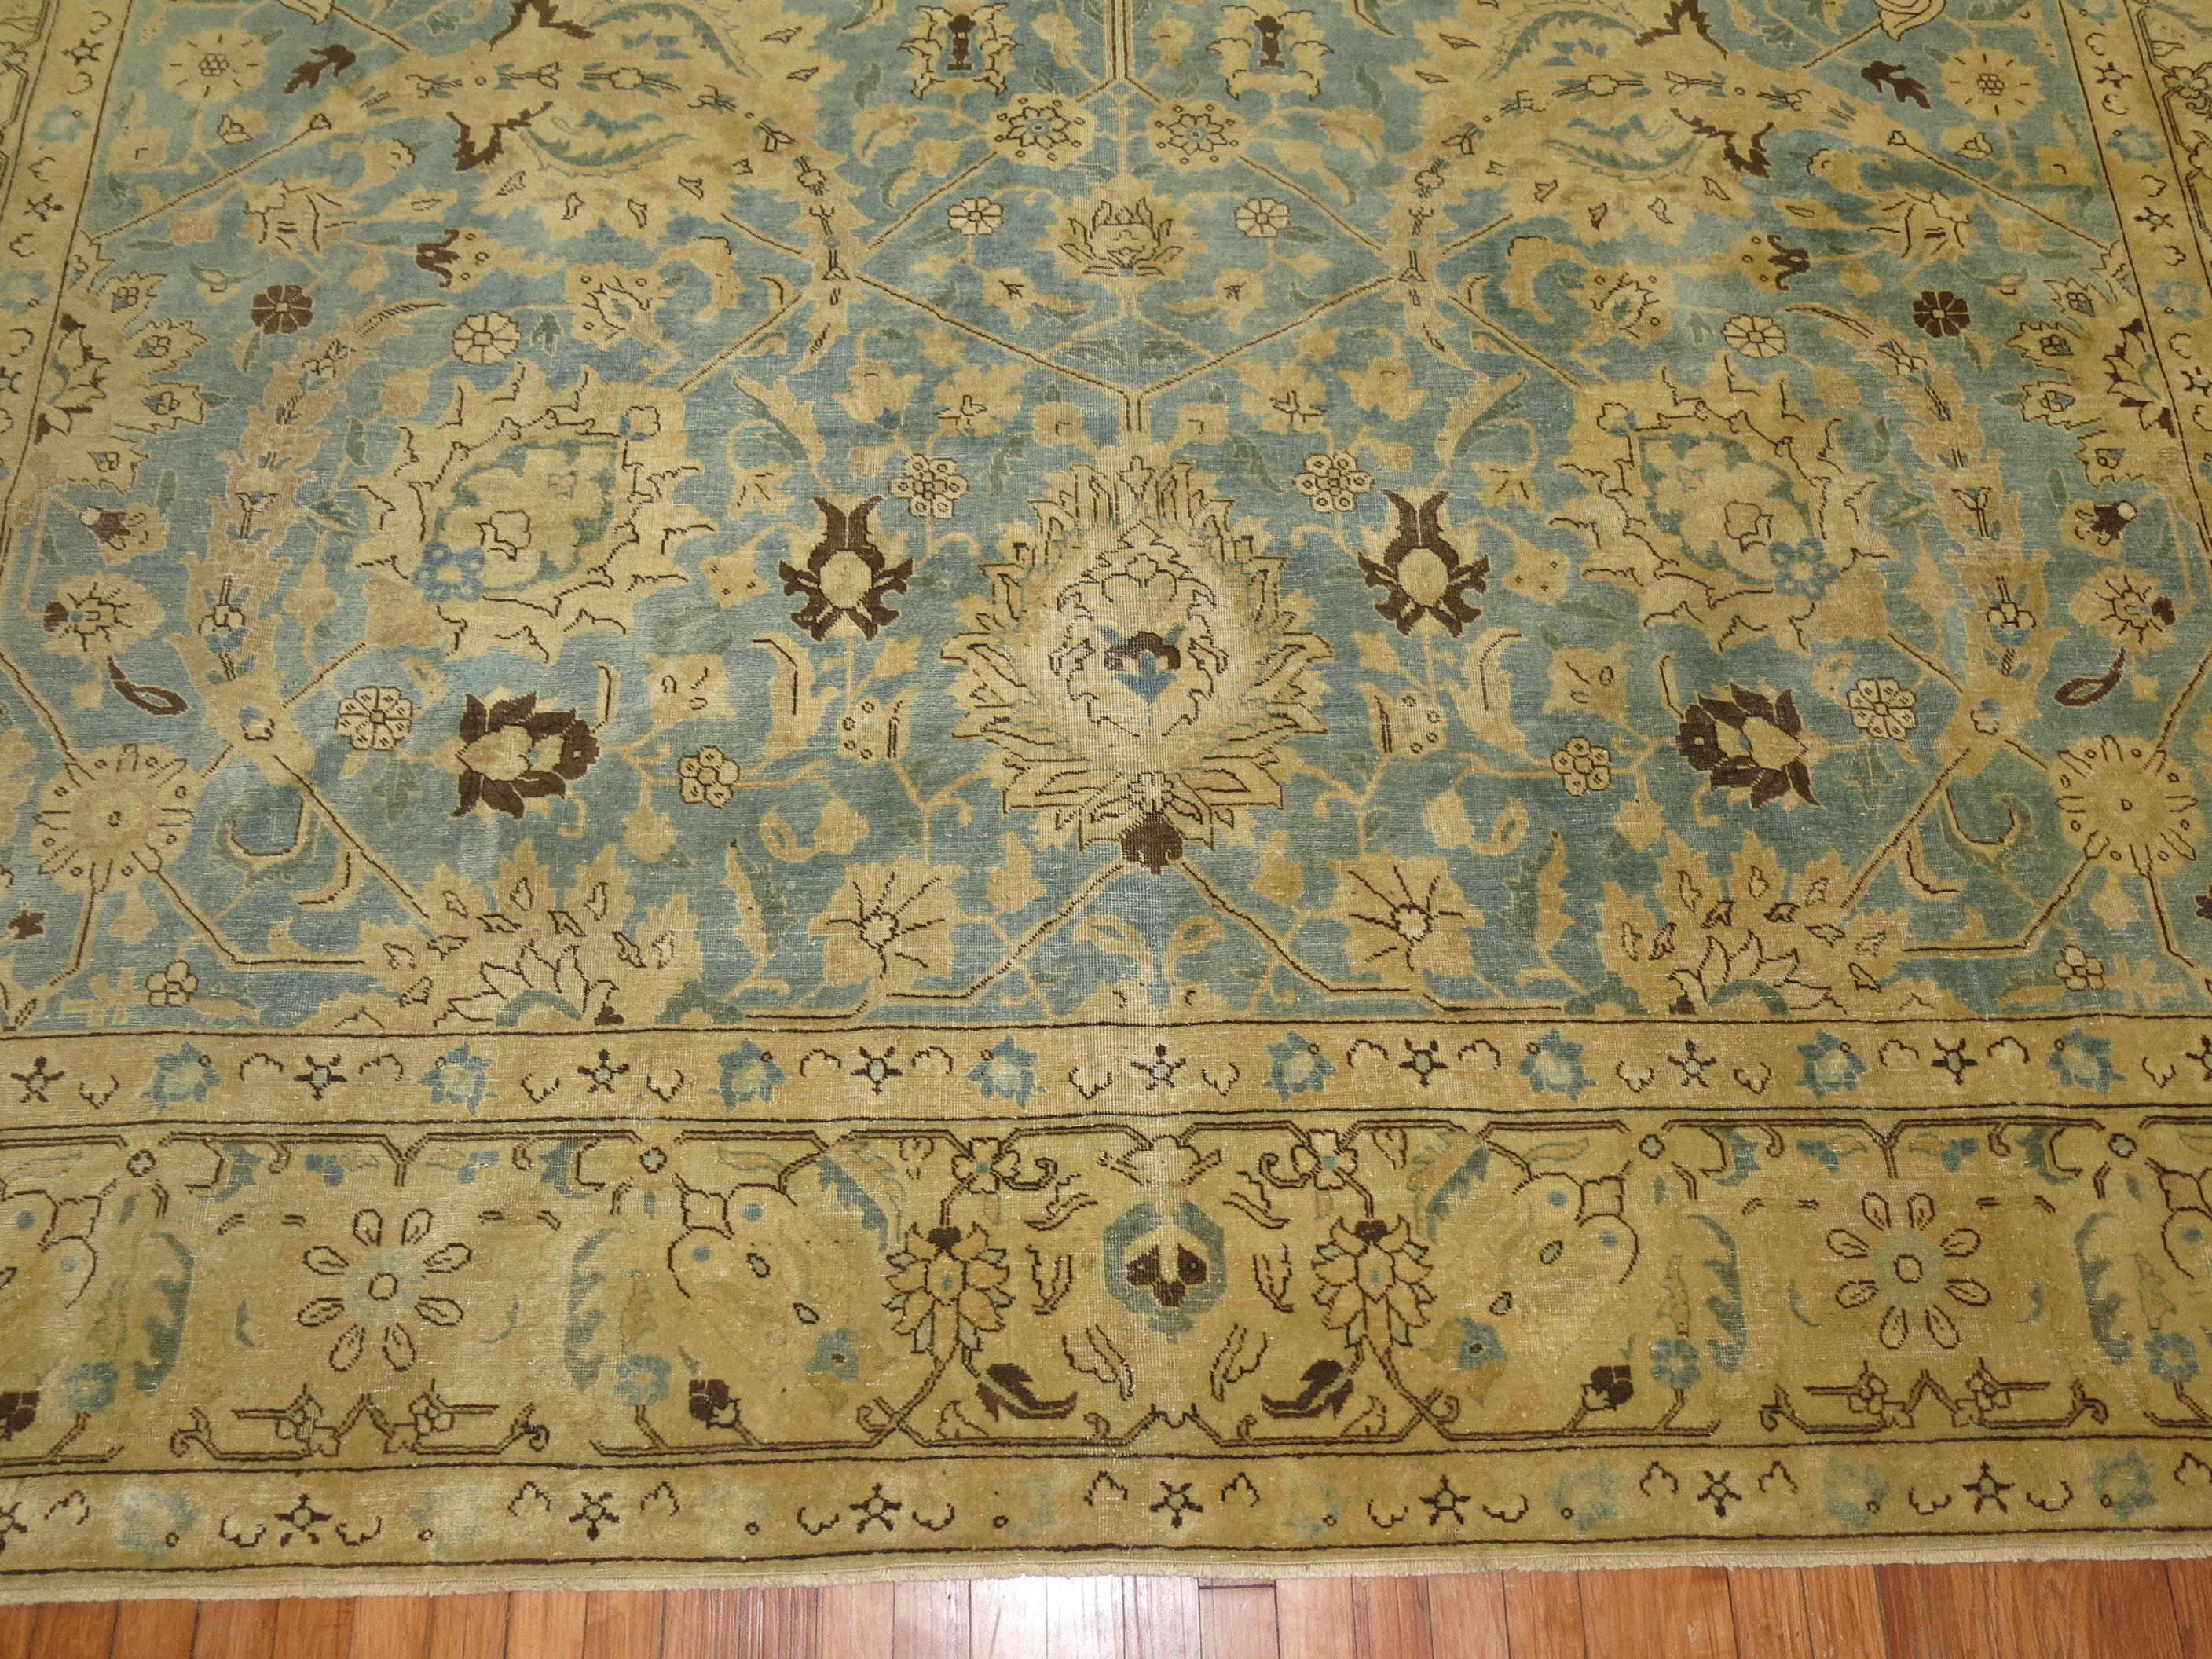 An early 20th century antique Persian Tabriz rug. Powder sky blue field, gold/yellow accents.

9'11'' x 12'10''

Tabriz rug weavers drew on a varied repertoire of delicate designs: multi-faceted flowerheads, subtle arabesques, lush vinery rendered